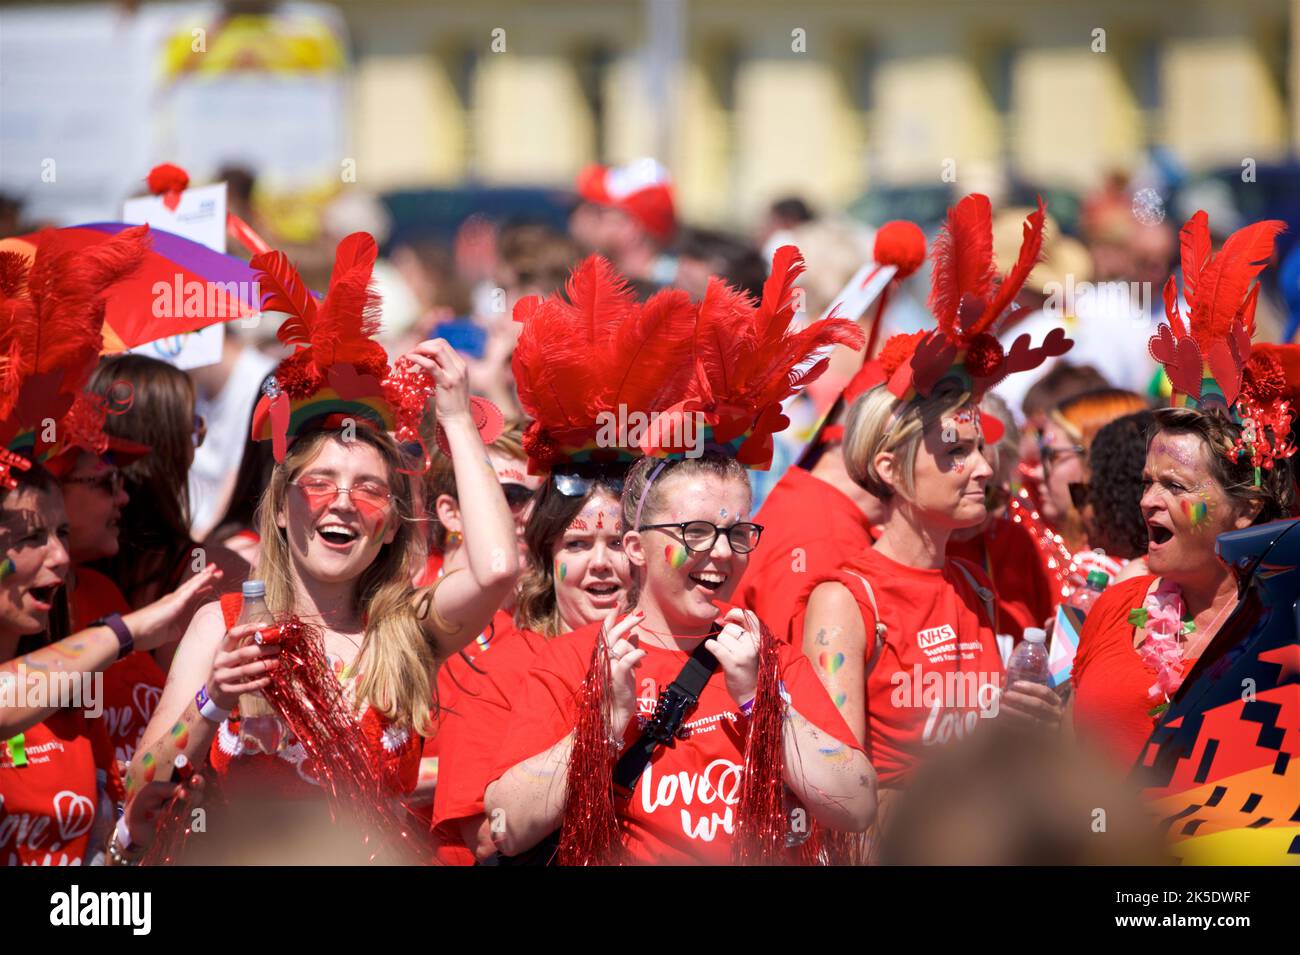 Brighton & Hove Pride Festival, Brighton & Hove, East Sussex, England. Women dressed in red participating in the parade, smiling and happy. Stock Photo